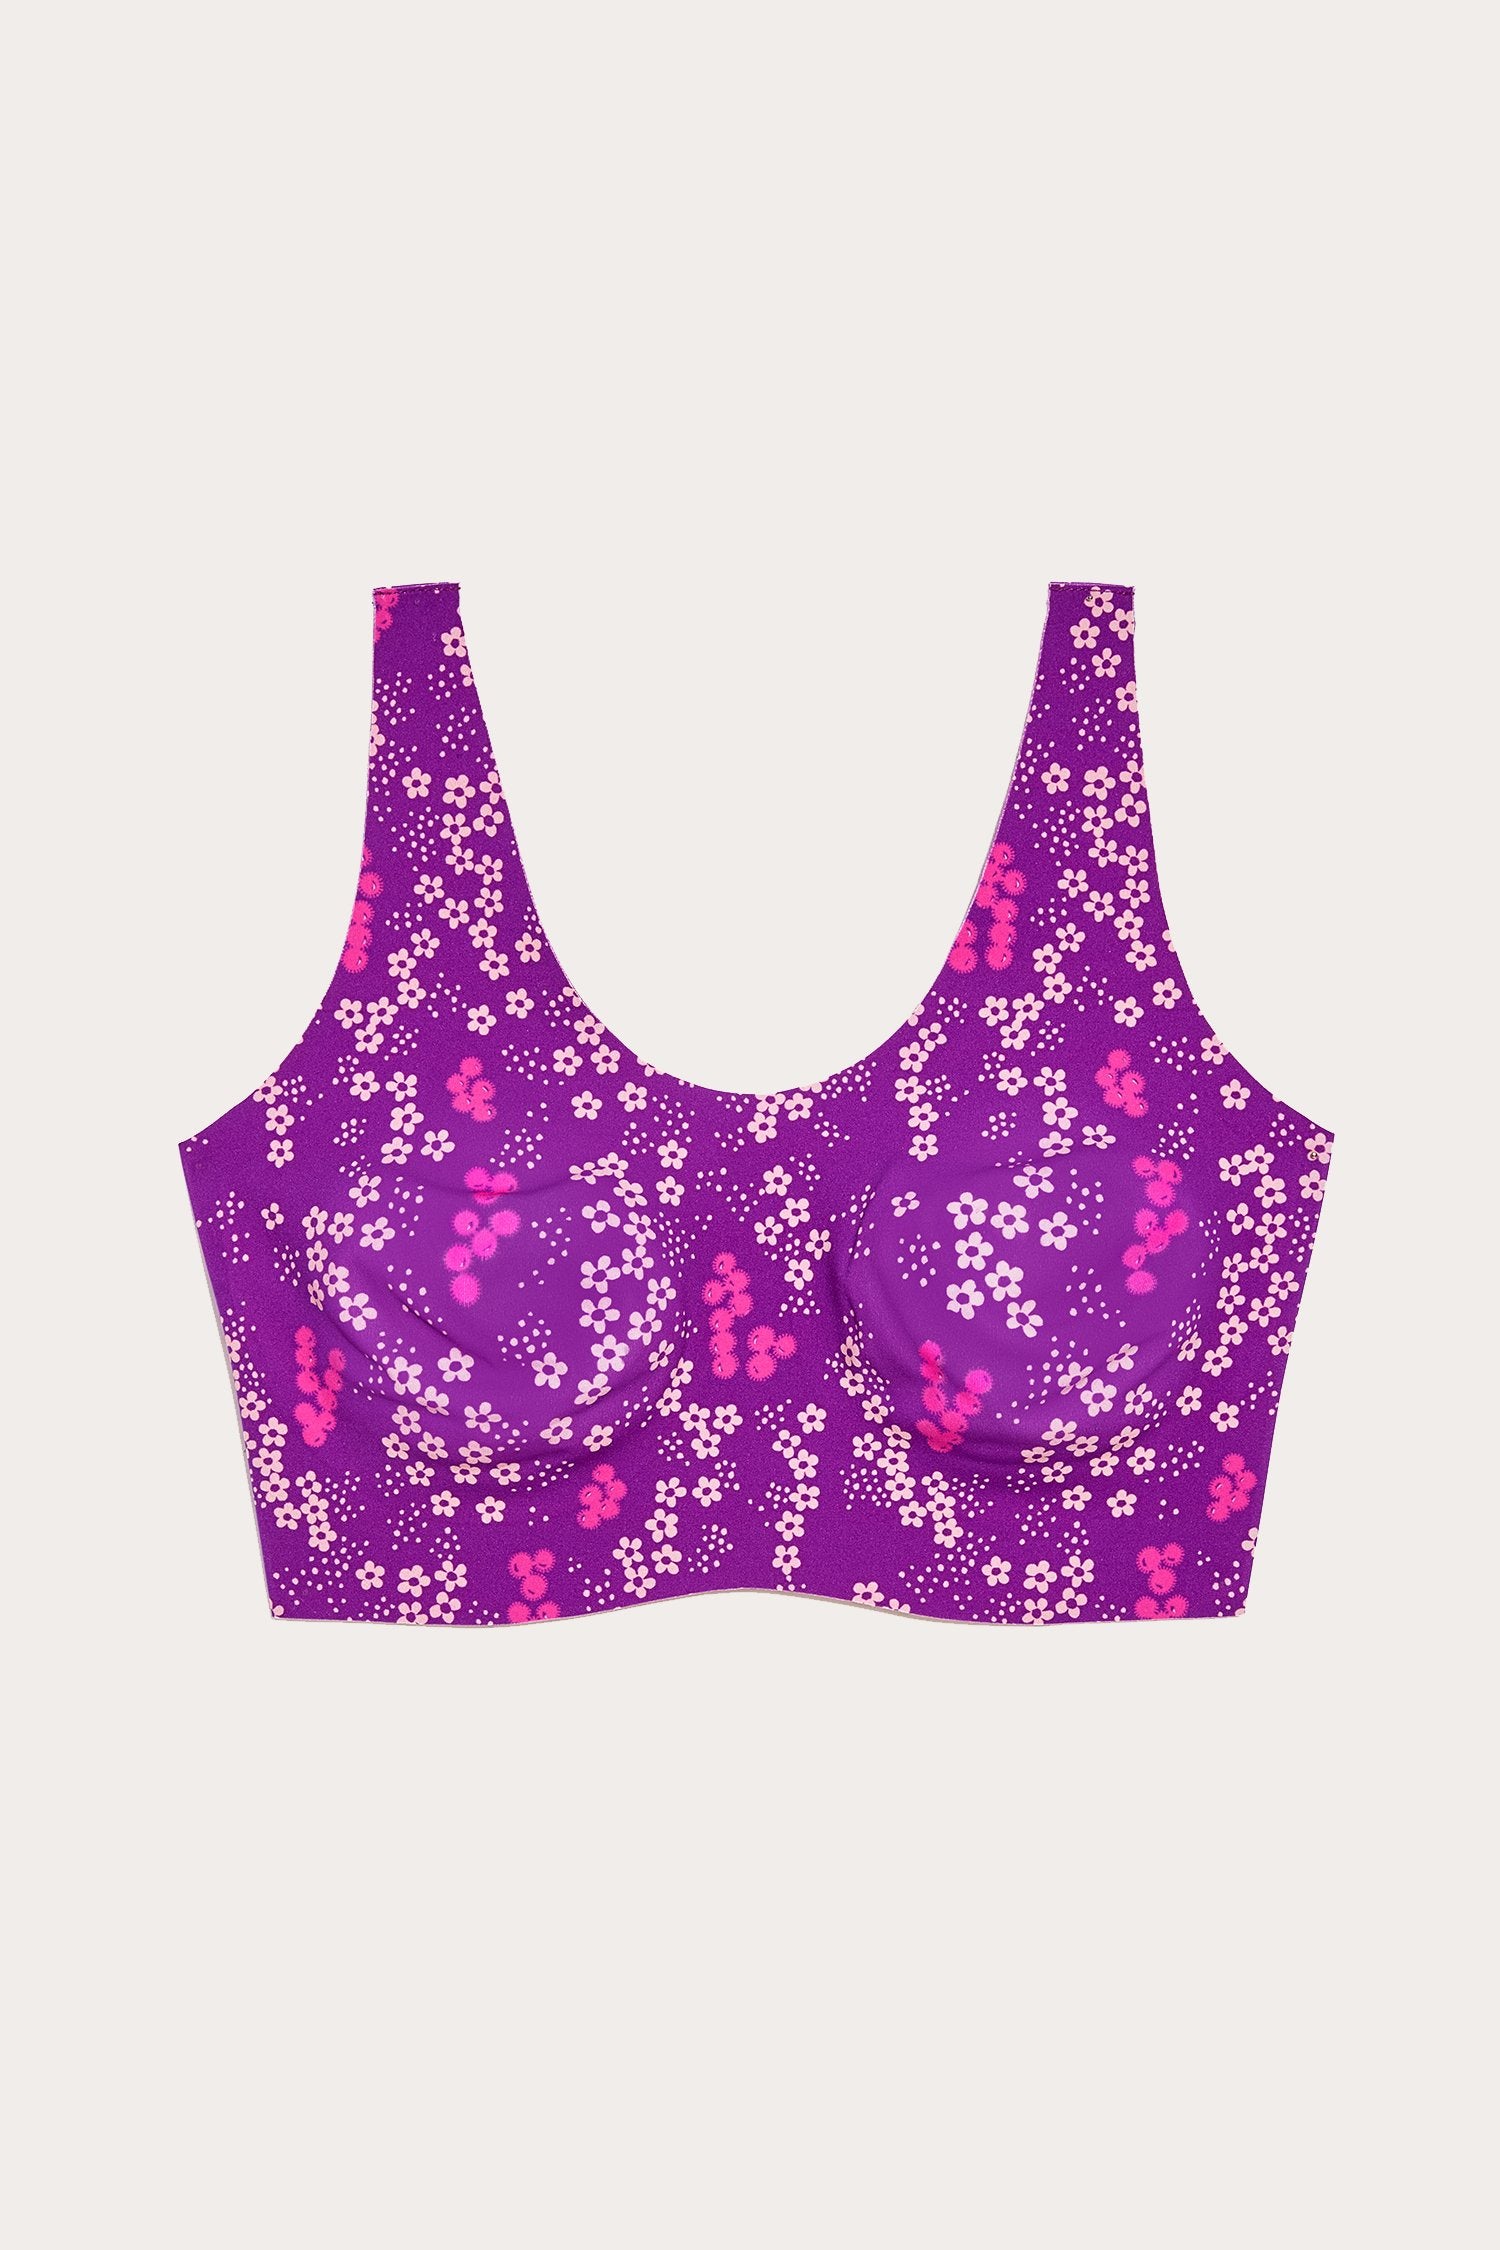 Anna Sui x Knix Ditsy Blooms, is a sport like Pullover Bra, purple with white daisies, and pink grapes like design